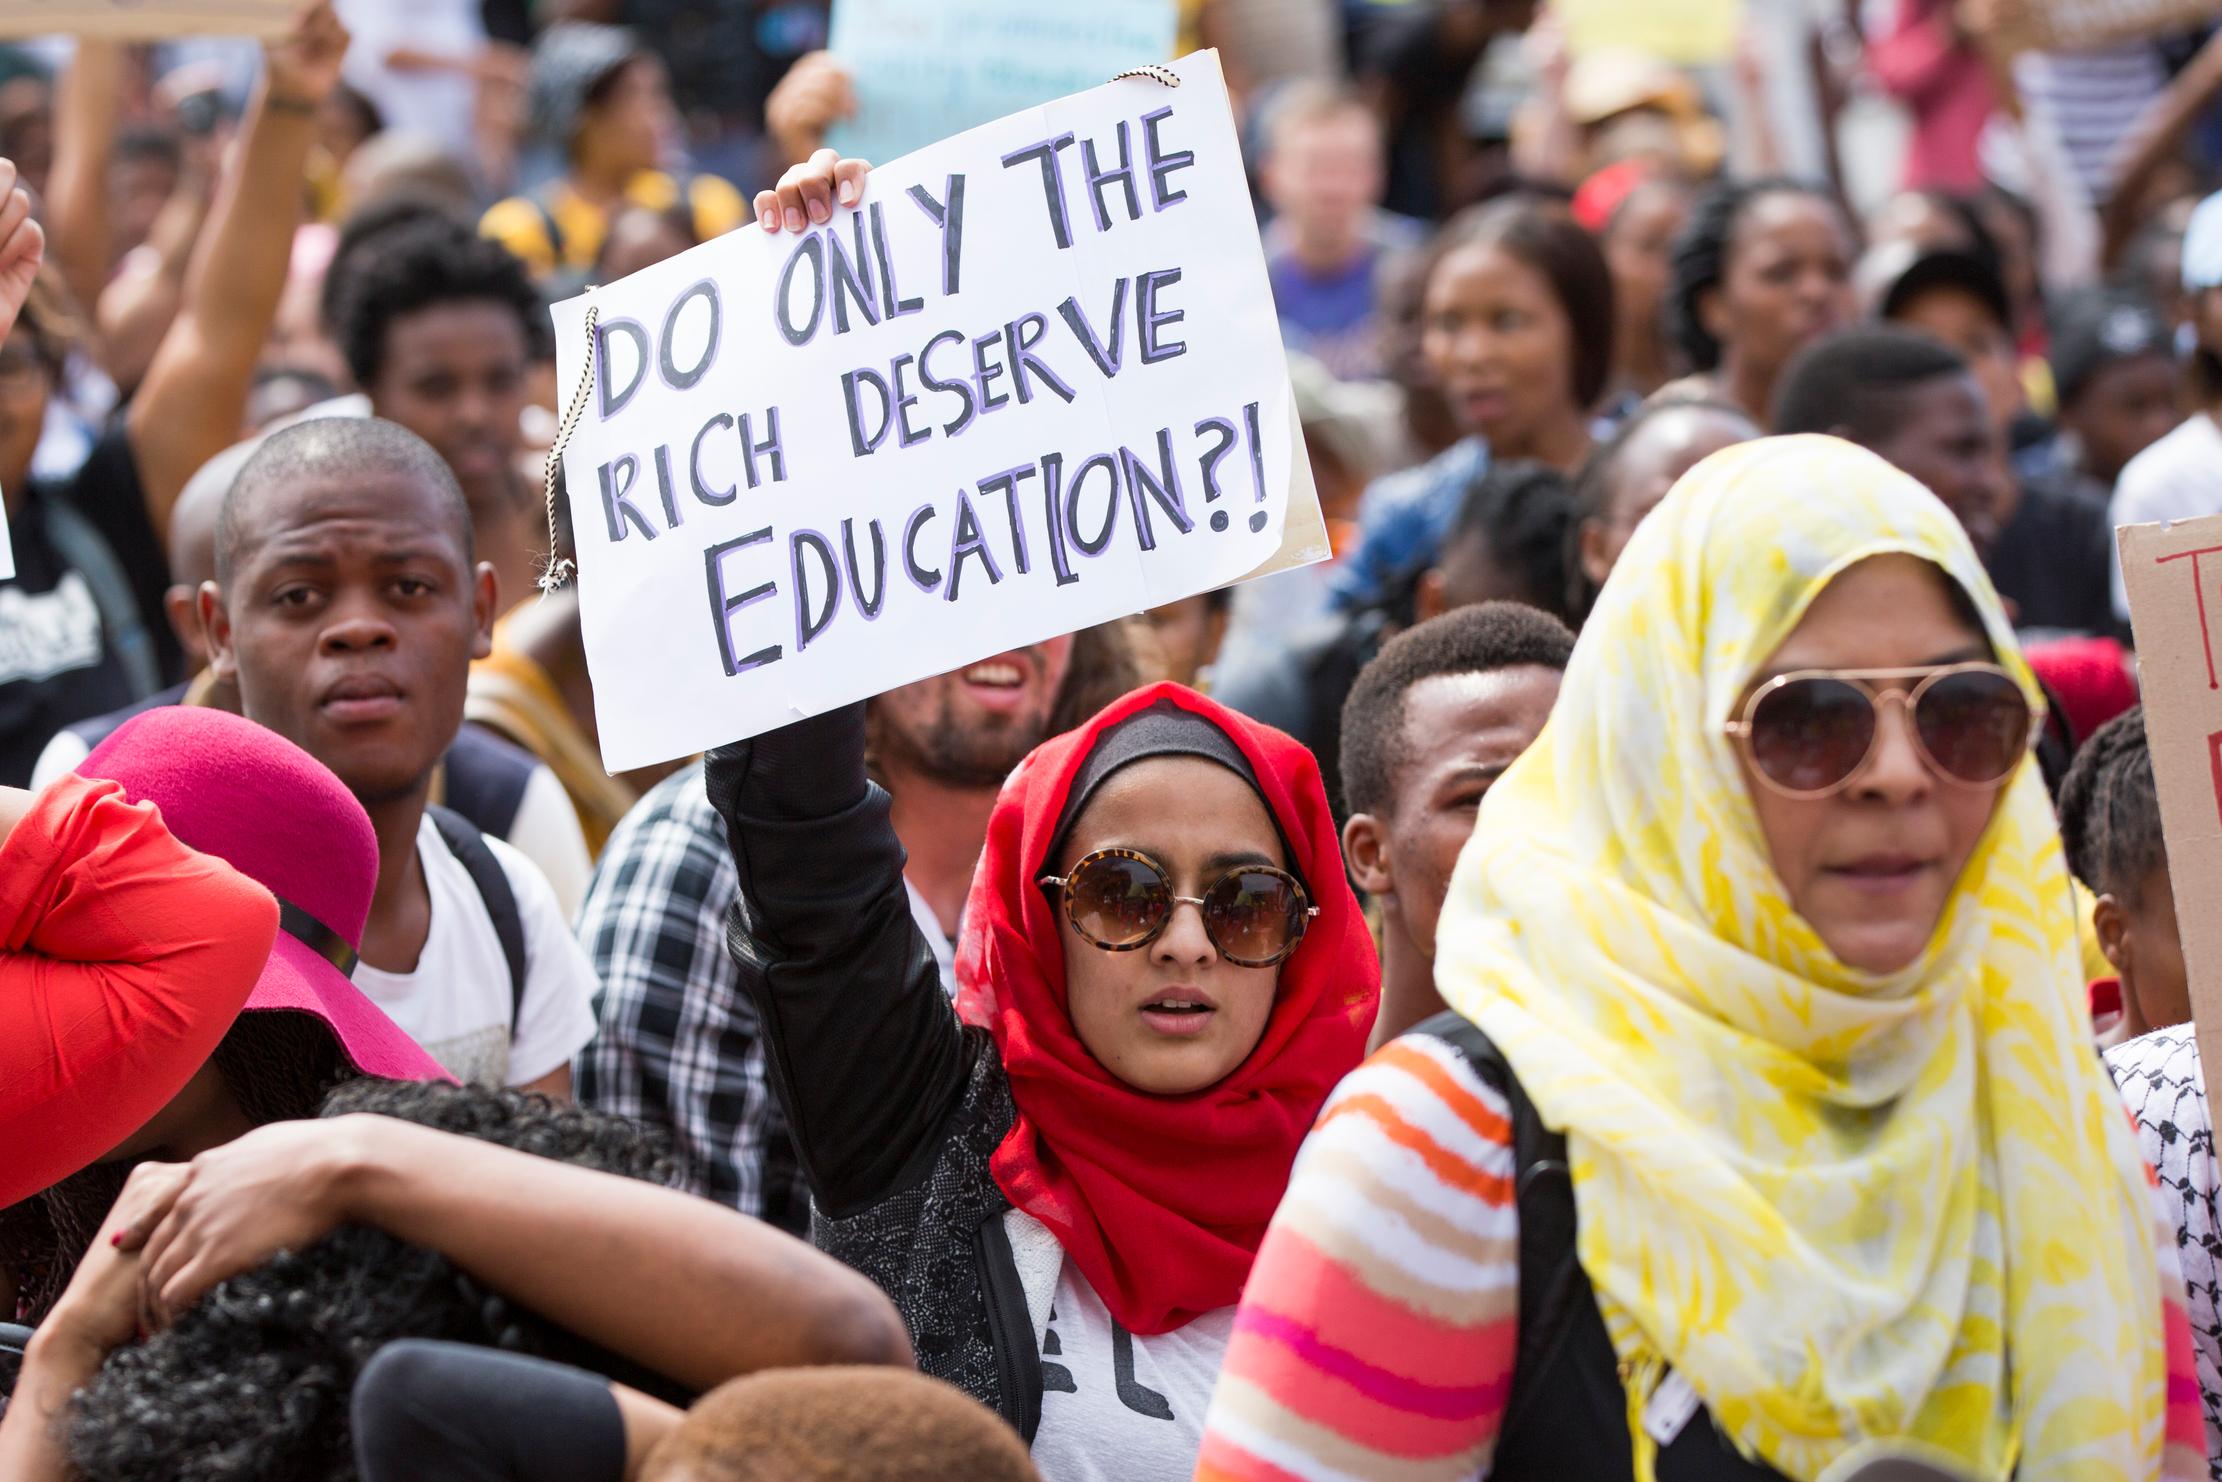 A group of people with one person holding a sign asking if education should be exclusively for the wealthy.